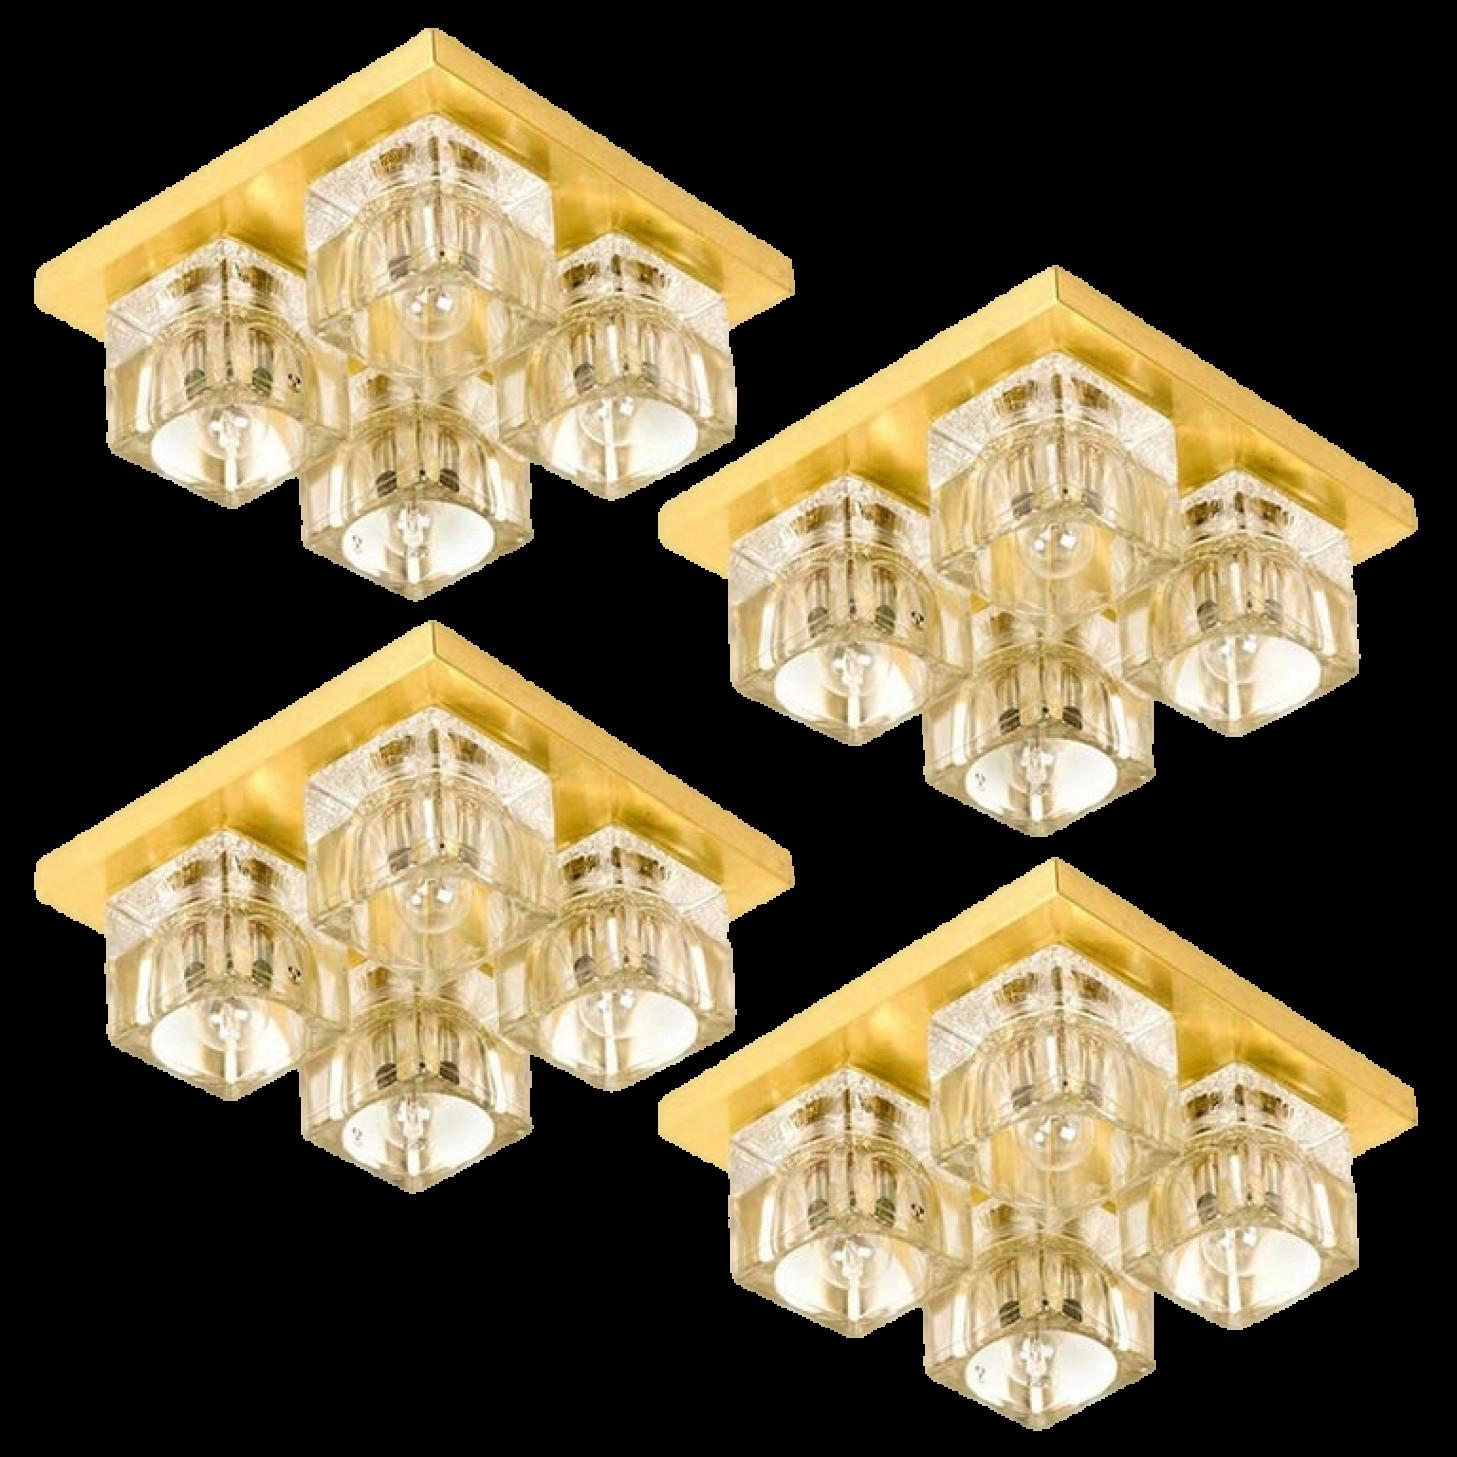 1 of the 8 Peill & Putzler wall light ceiling light, brass and glass, Germany, 1970. Each sculptural vintage wall light consists of four clear glass cubes on a square brass frame which beautifully reflects the light with a warm glow.

The four high